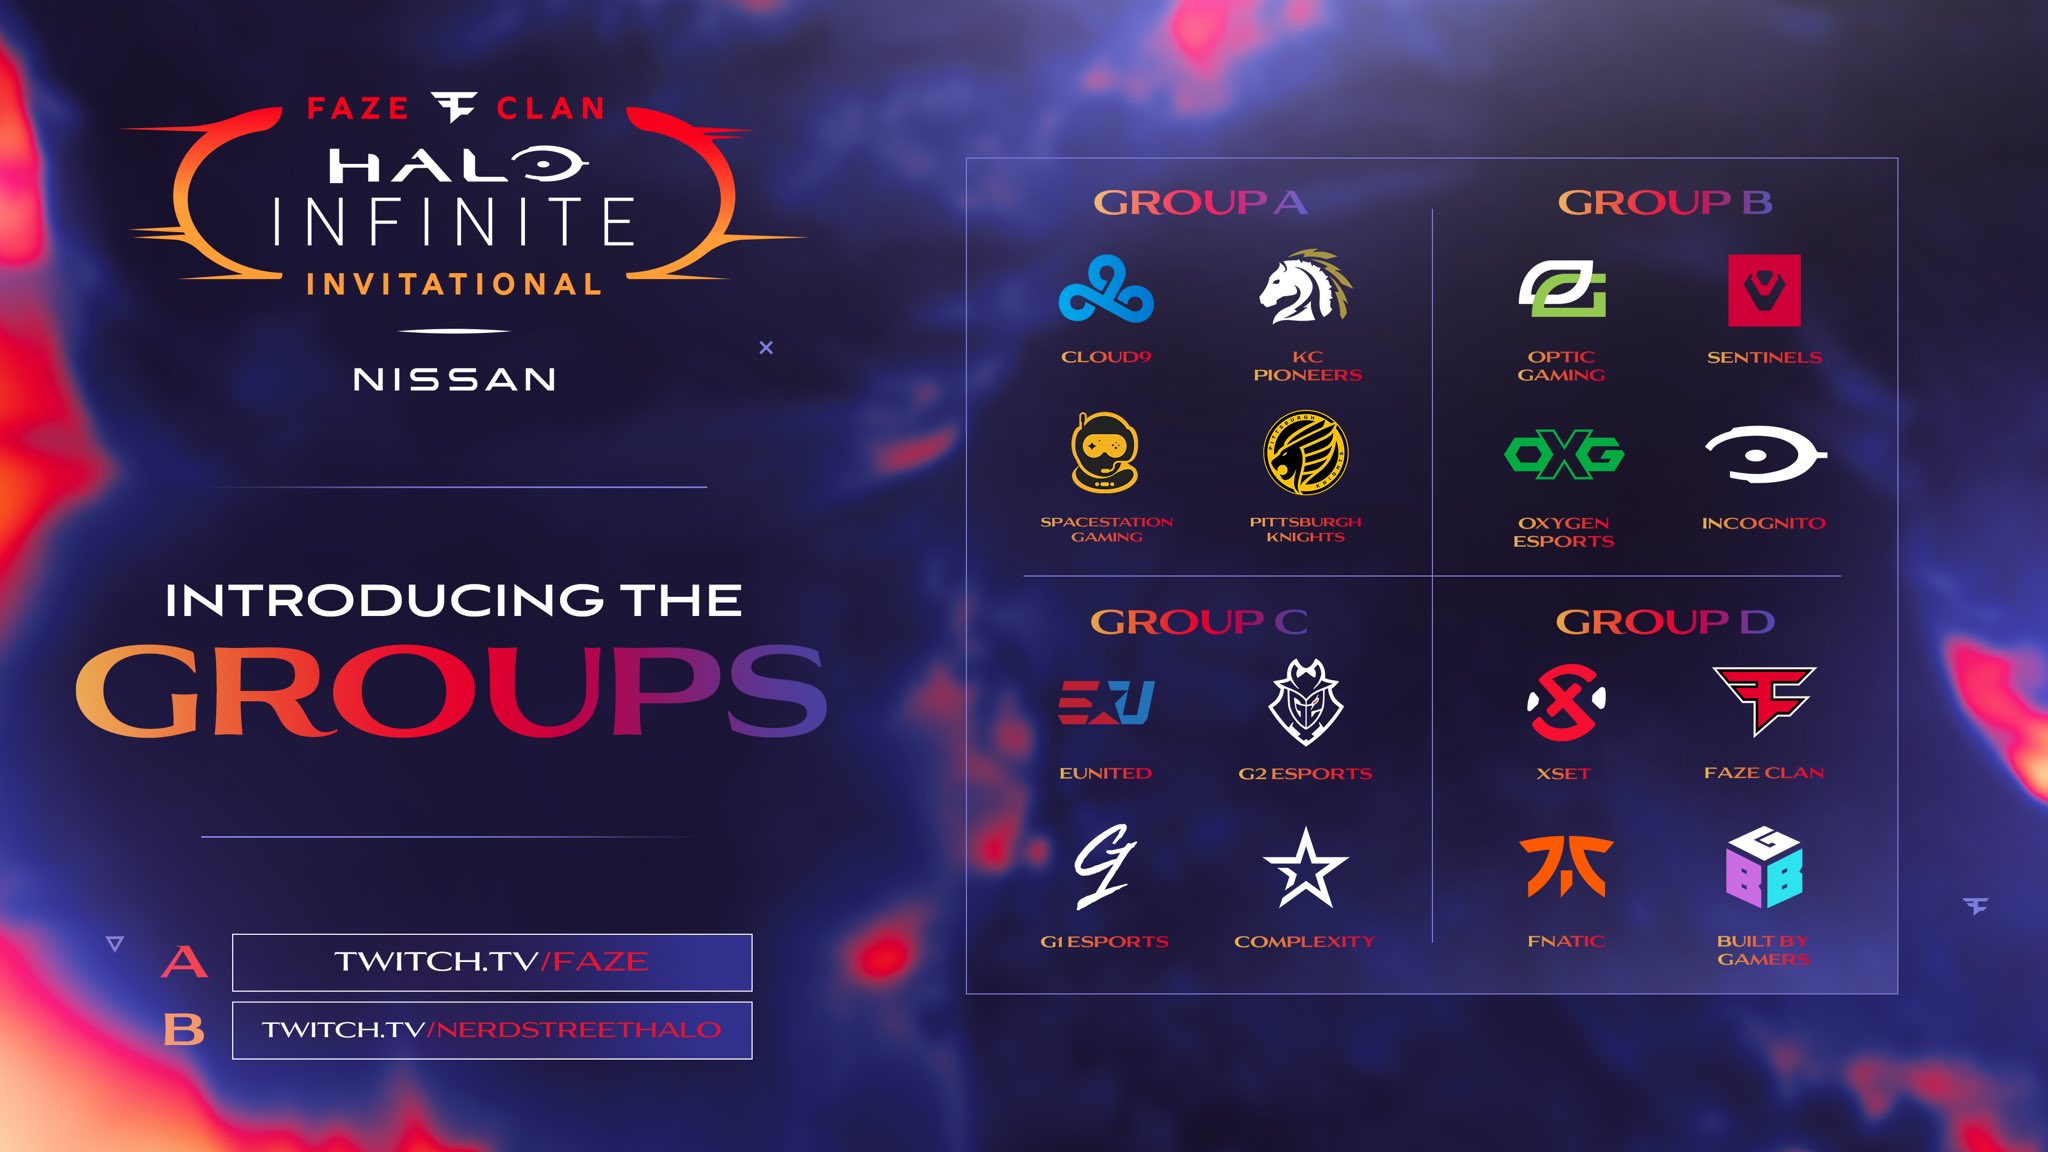 Image for introducing the Groups of HCS Major Kansas City